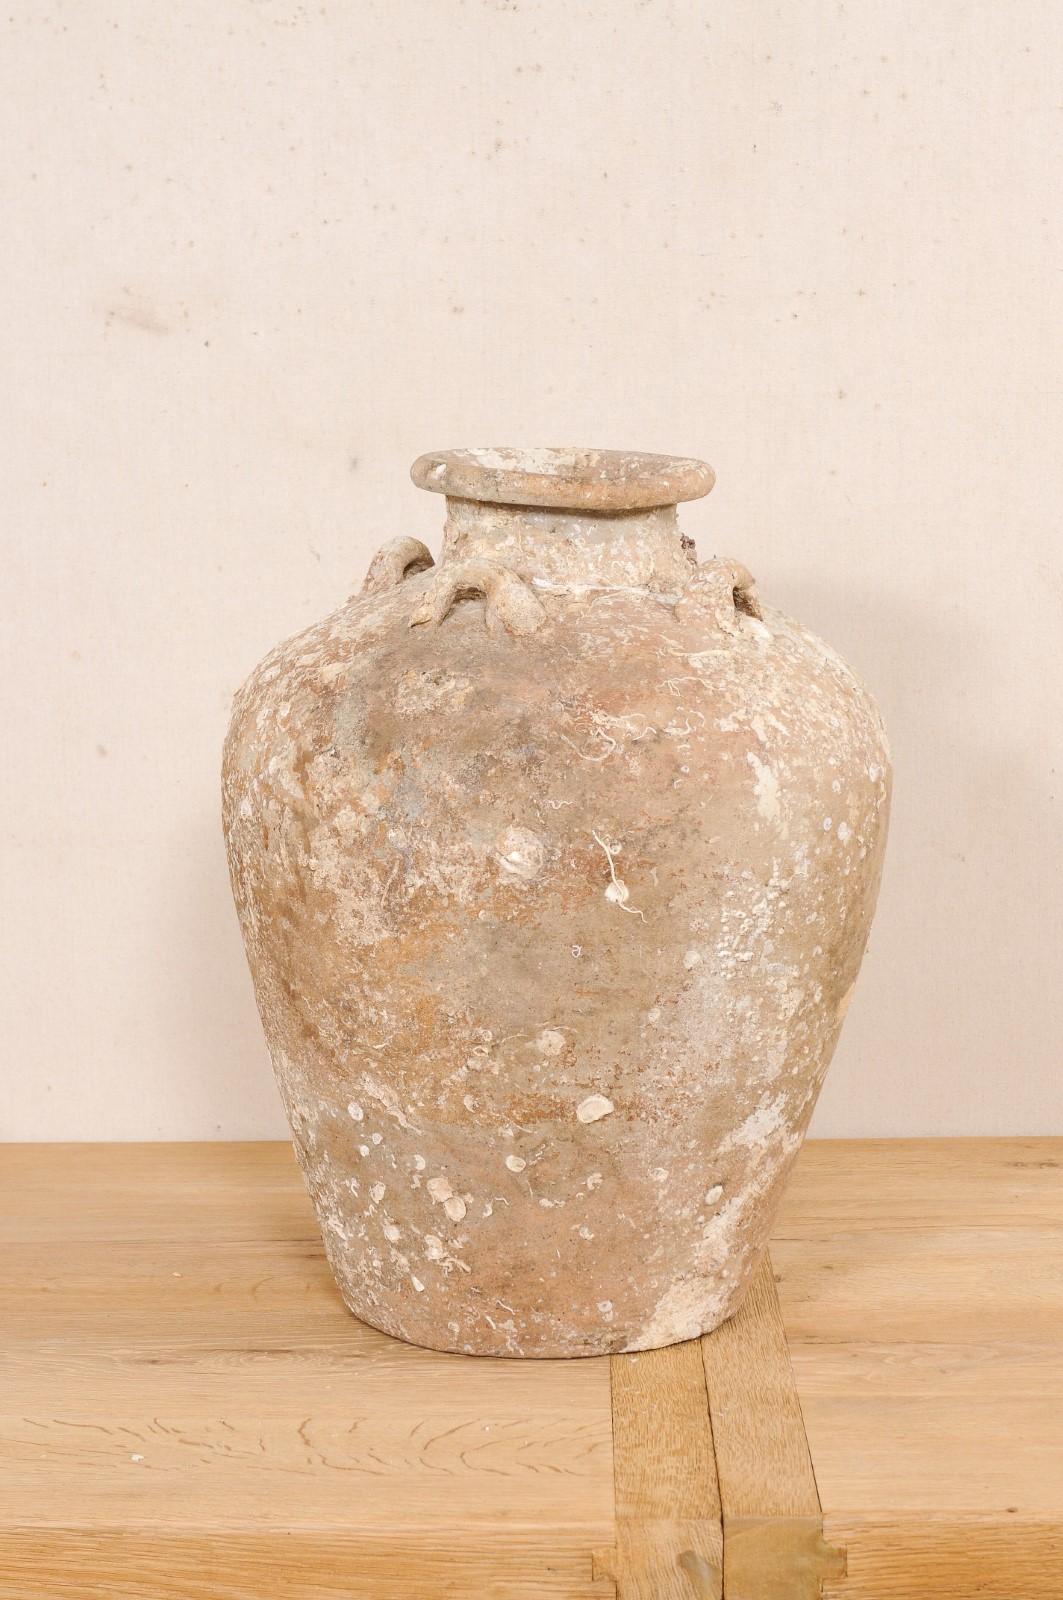 Ceramic Early to Mid 16th Century Salvaged Ming Gap Jar from Shipwreck  For Sale